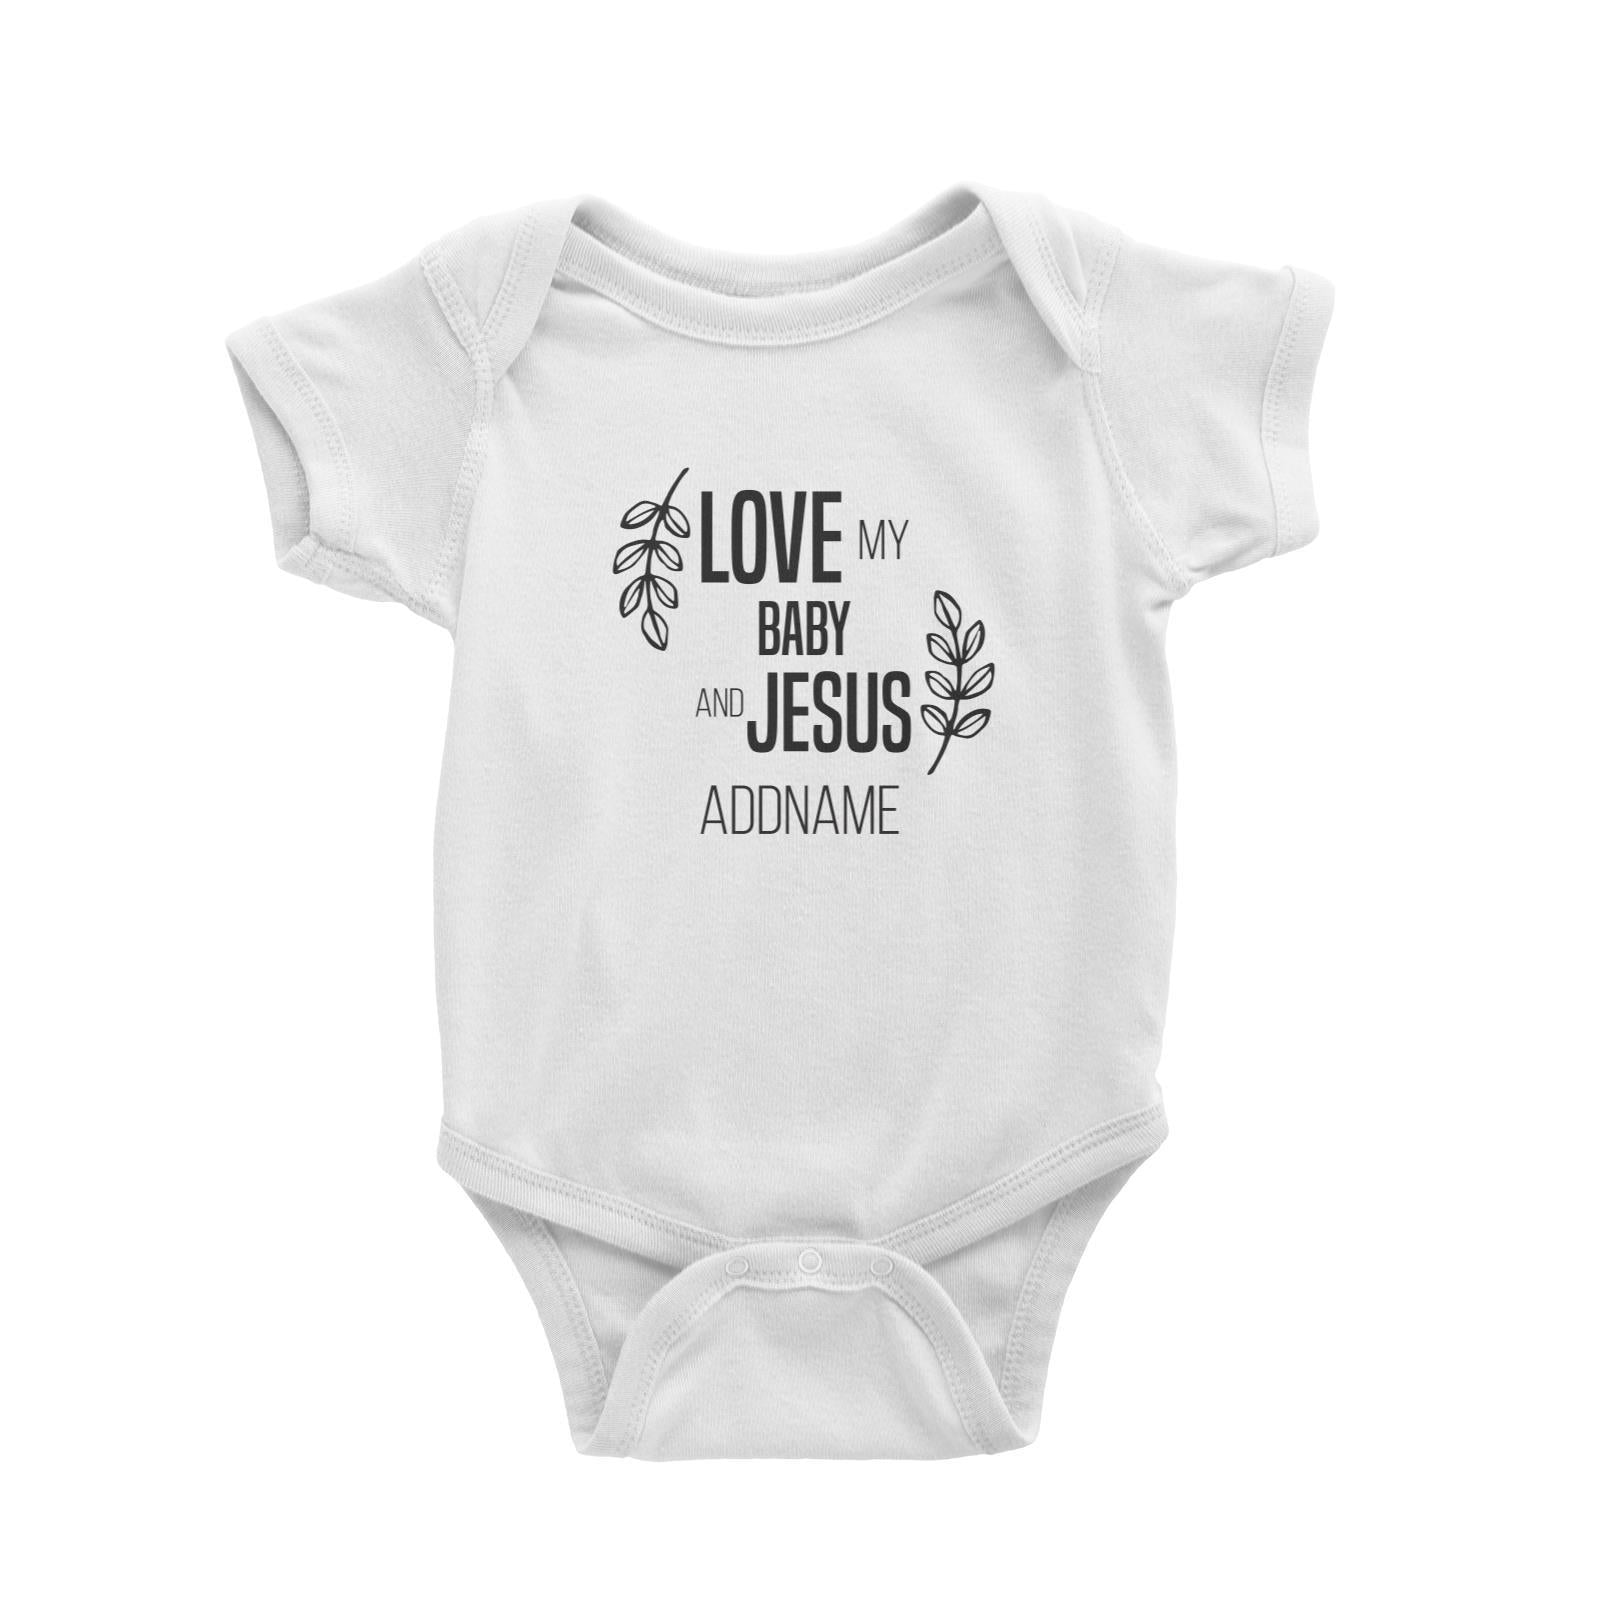 Christian Series Love My Baby And Jesus Addname Baby Romper